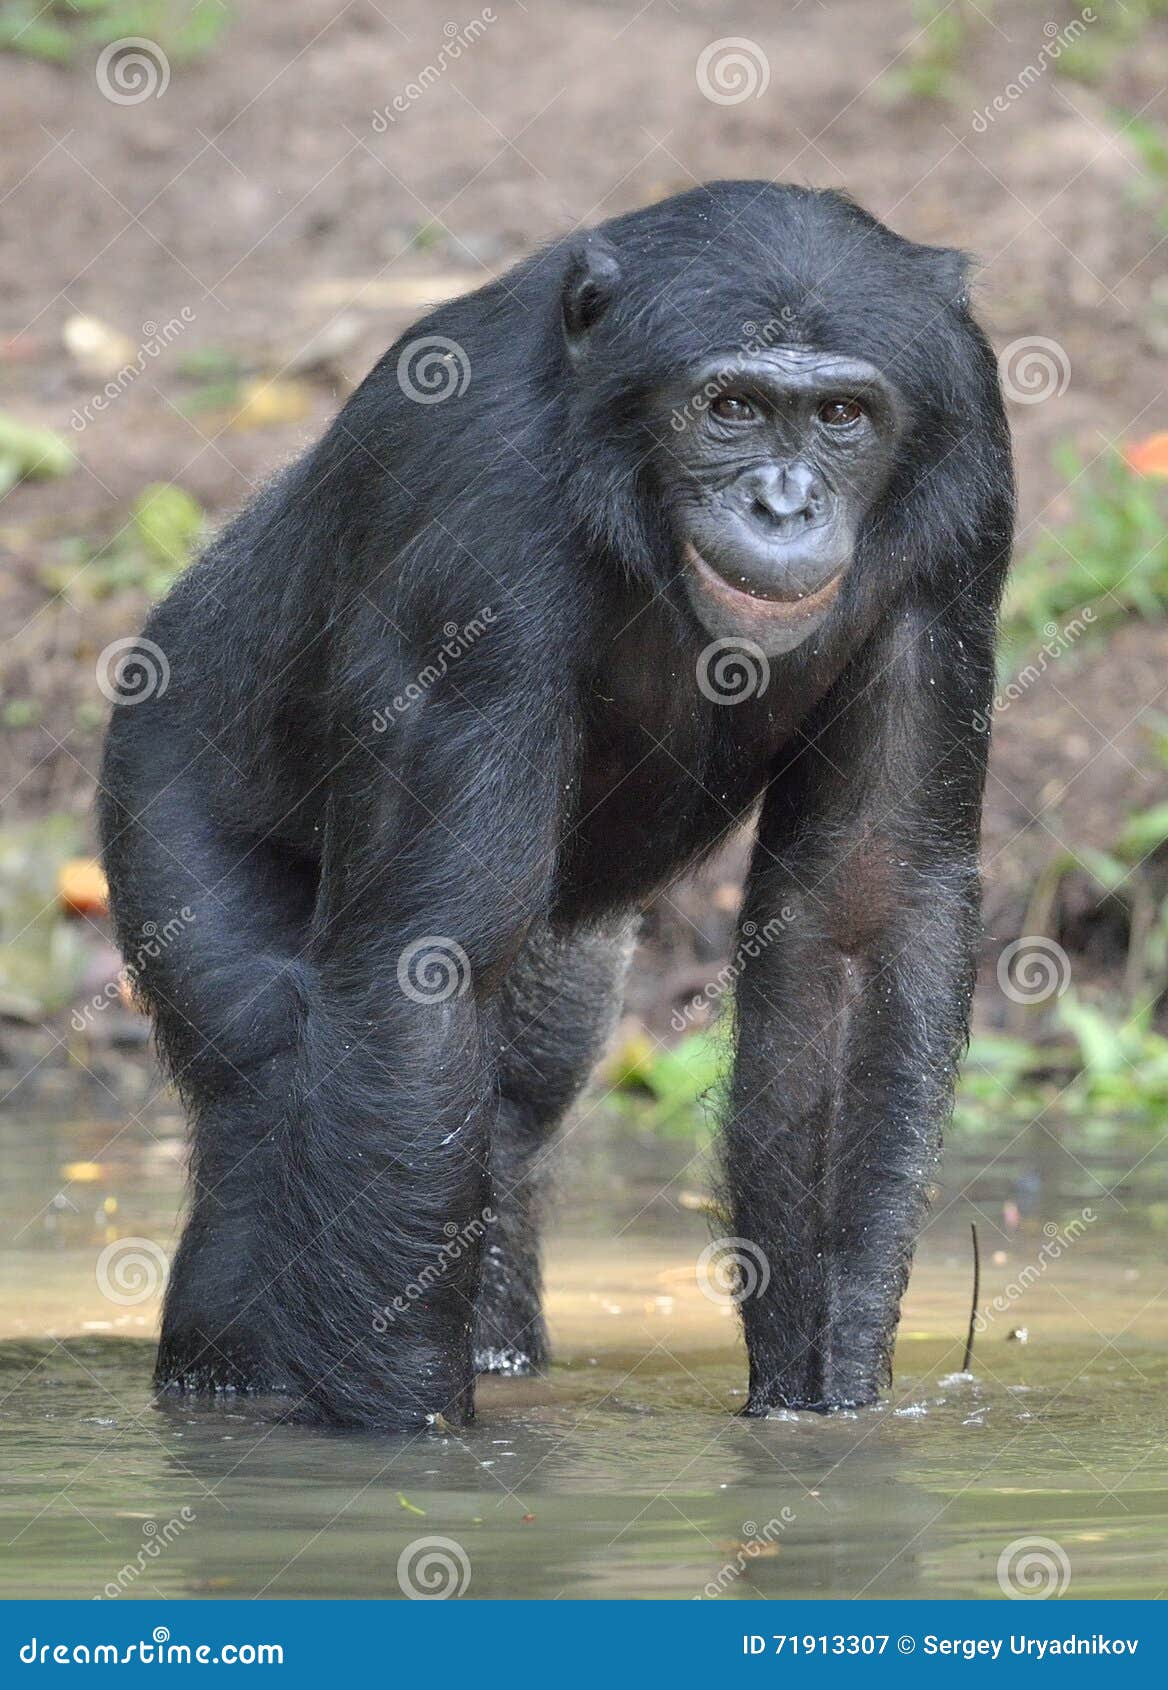 bonobo standing in water looks for the fruit which fell in water. bonobo ( pan paniscus ).